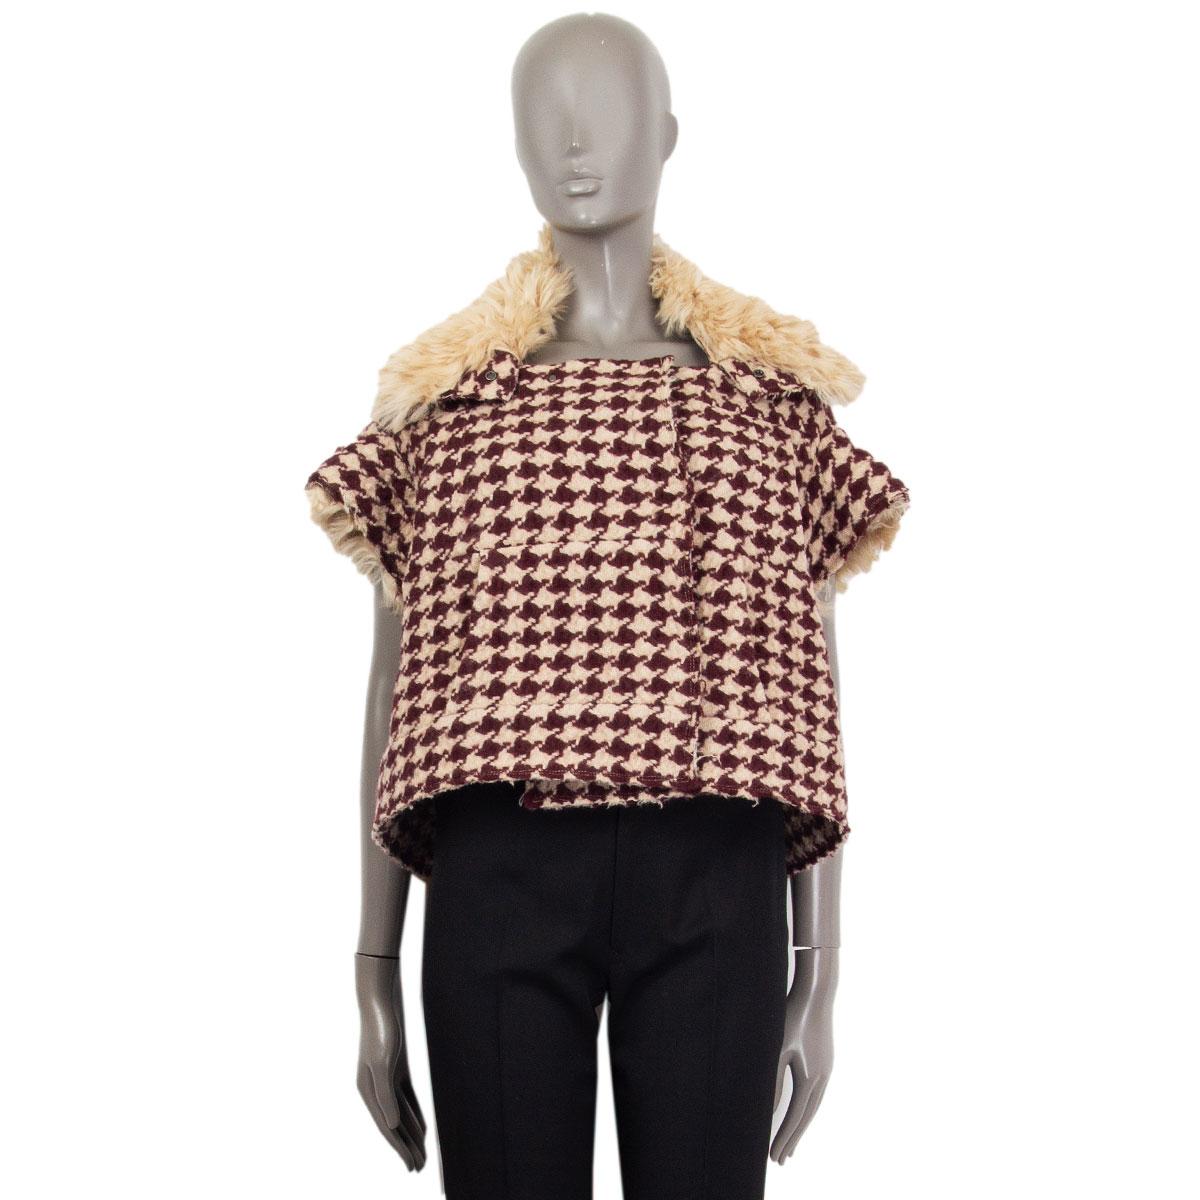 authentic Marni pied de poule short sleeve jacket in beige and burgundy wool (100%) and in lamb leather (100%) on the neck, inside the sleeves and on the inside trim in the back. Closes with buttons on the front and has four slit pockets. Unlined